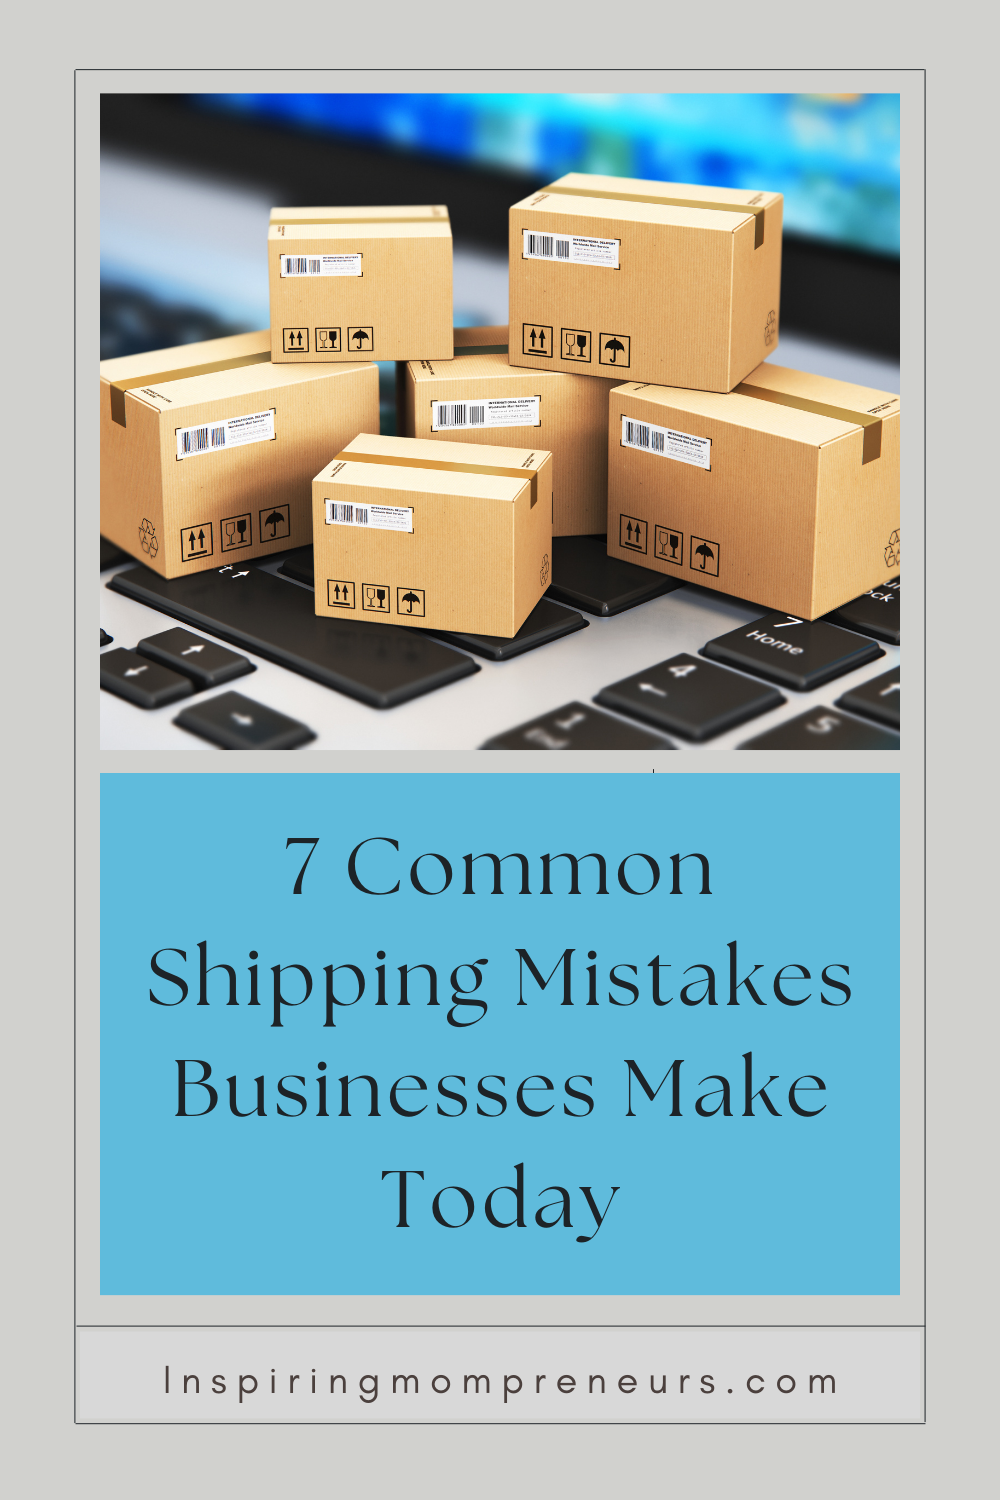 7 Common Shipping Mistakes Businesses Make Today | 7 Common Shipping Mistakes Businesses Make Today